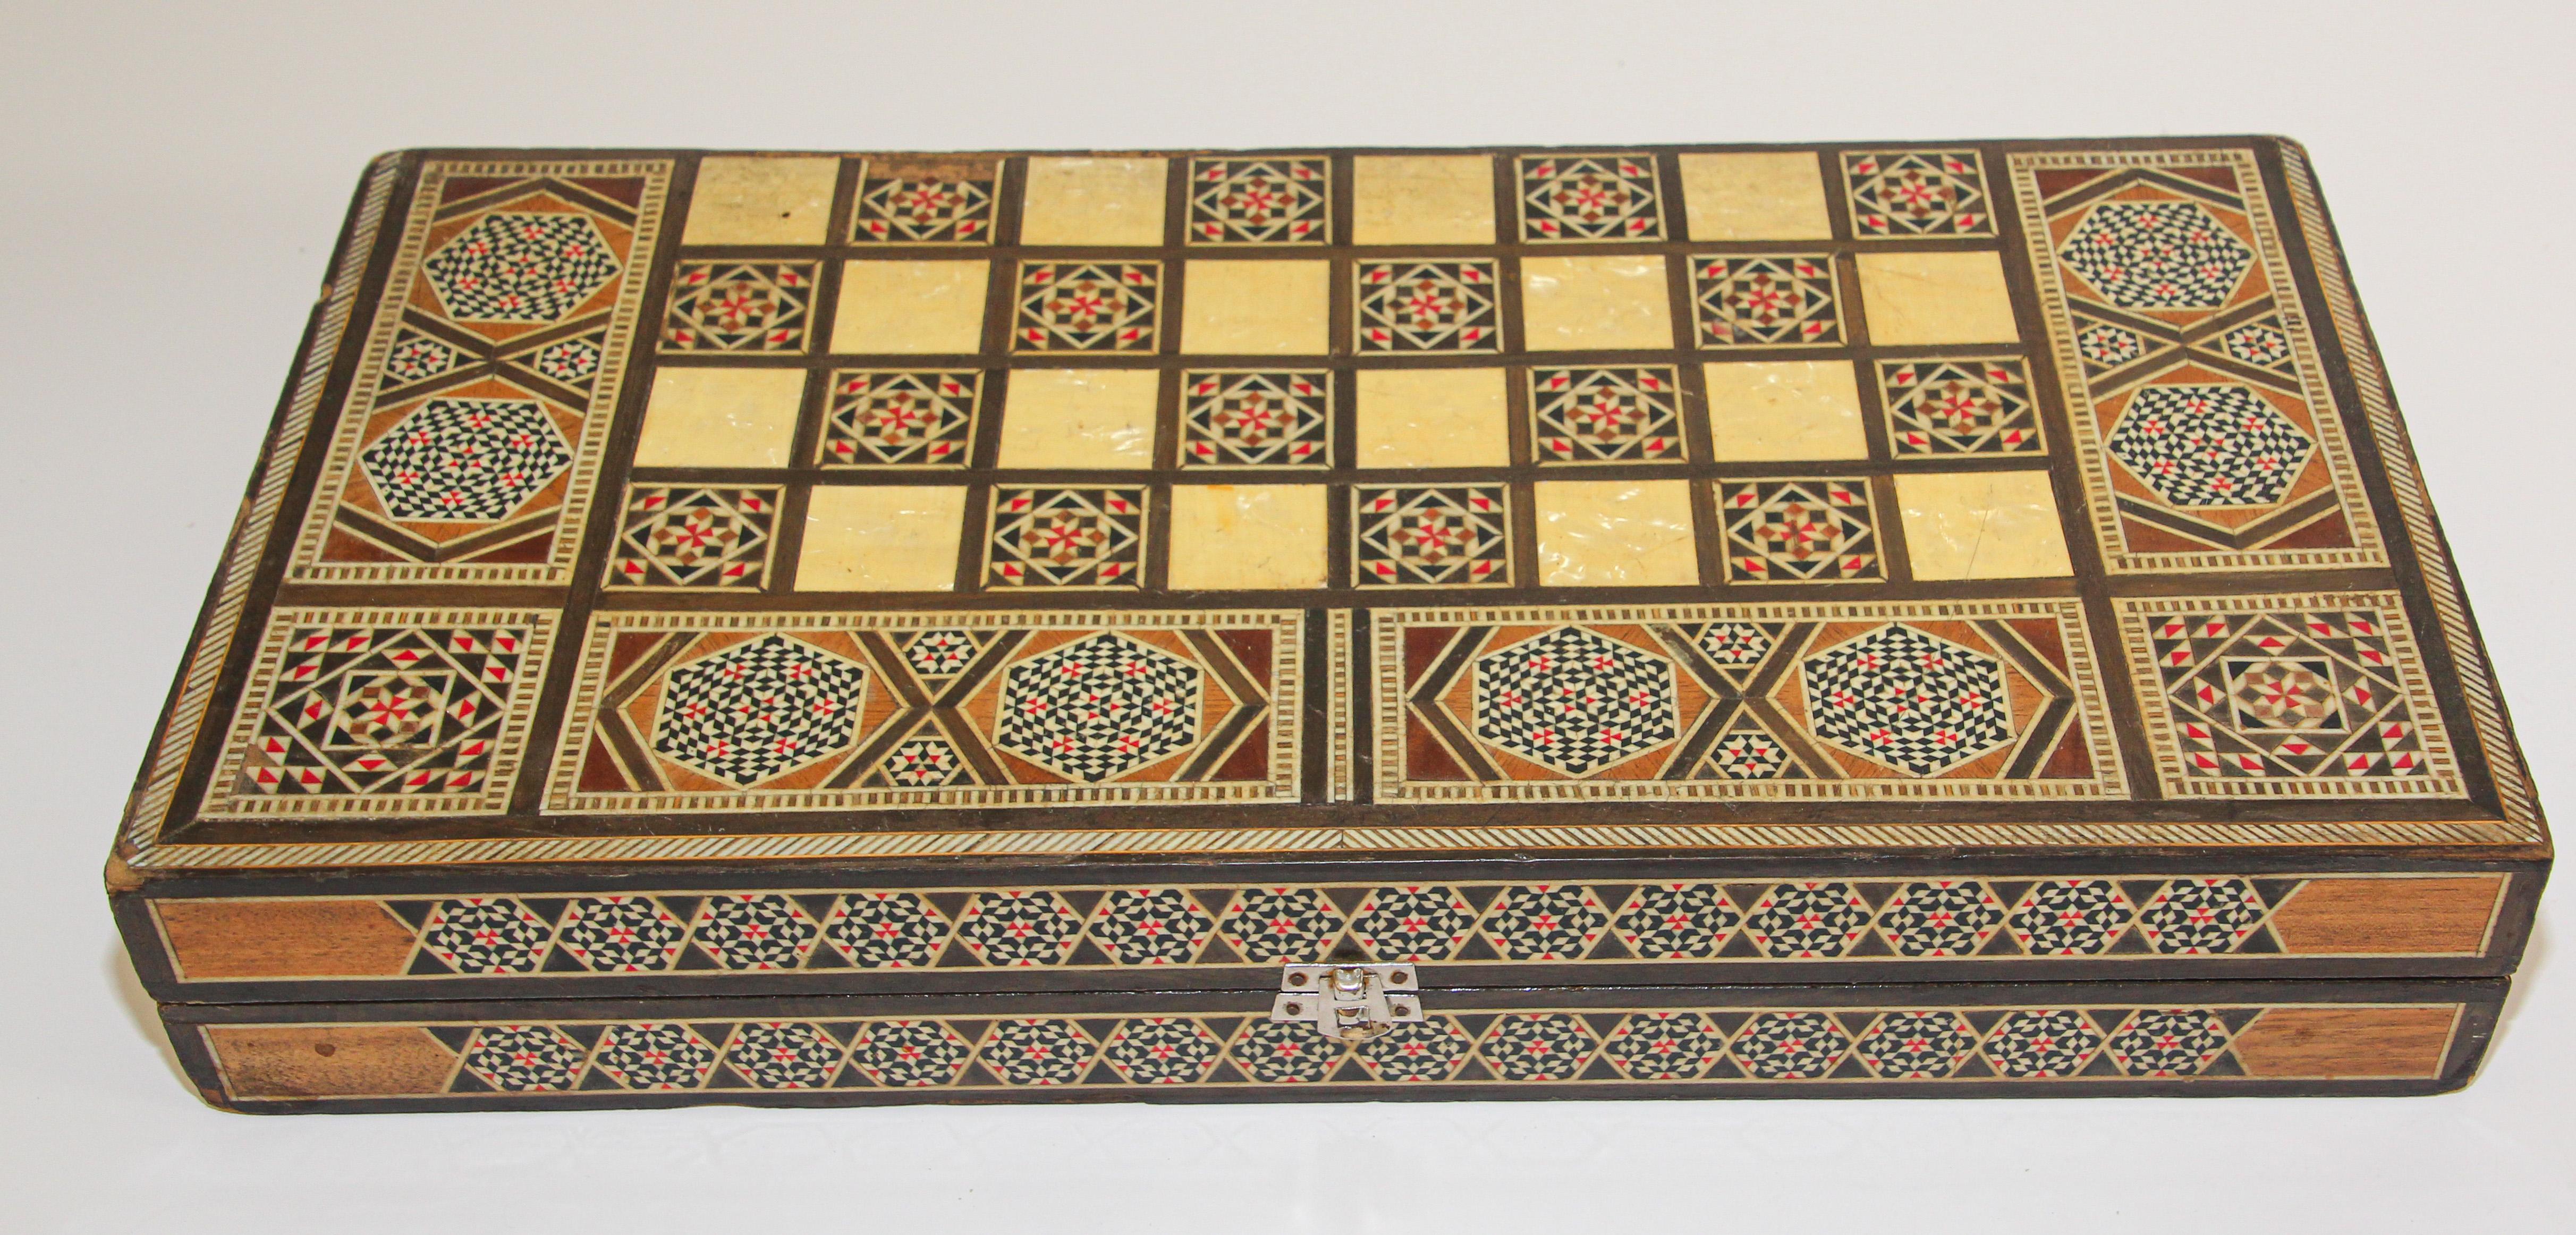 Large vintage midcentury folding box inlaid with mother of pearl mosaic backgammon game.
Middle Eastern folding game box inlaid with micro mosaic marquetry features a chess and checker board on the exterior and backgammon board on the interior with